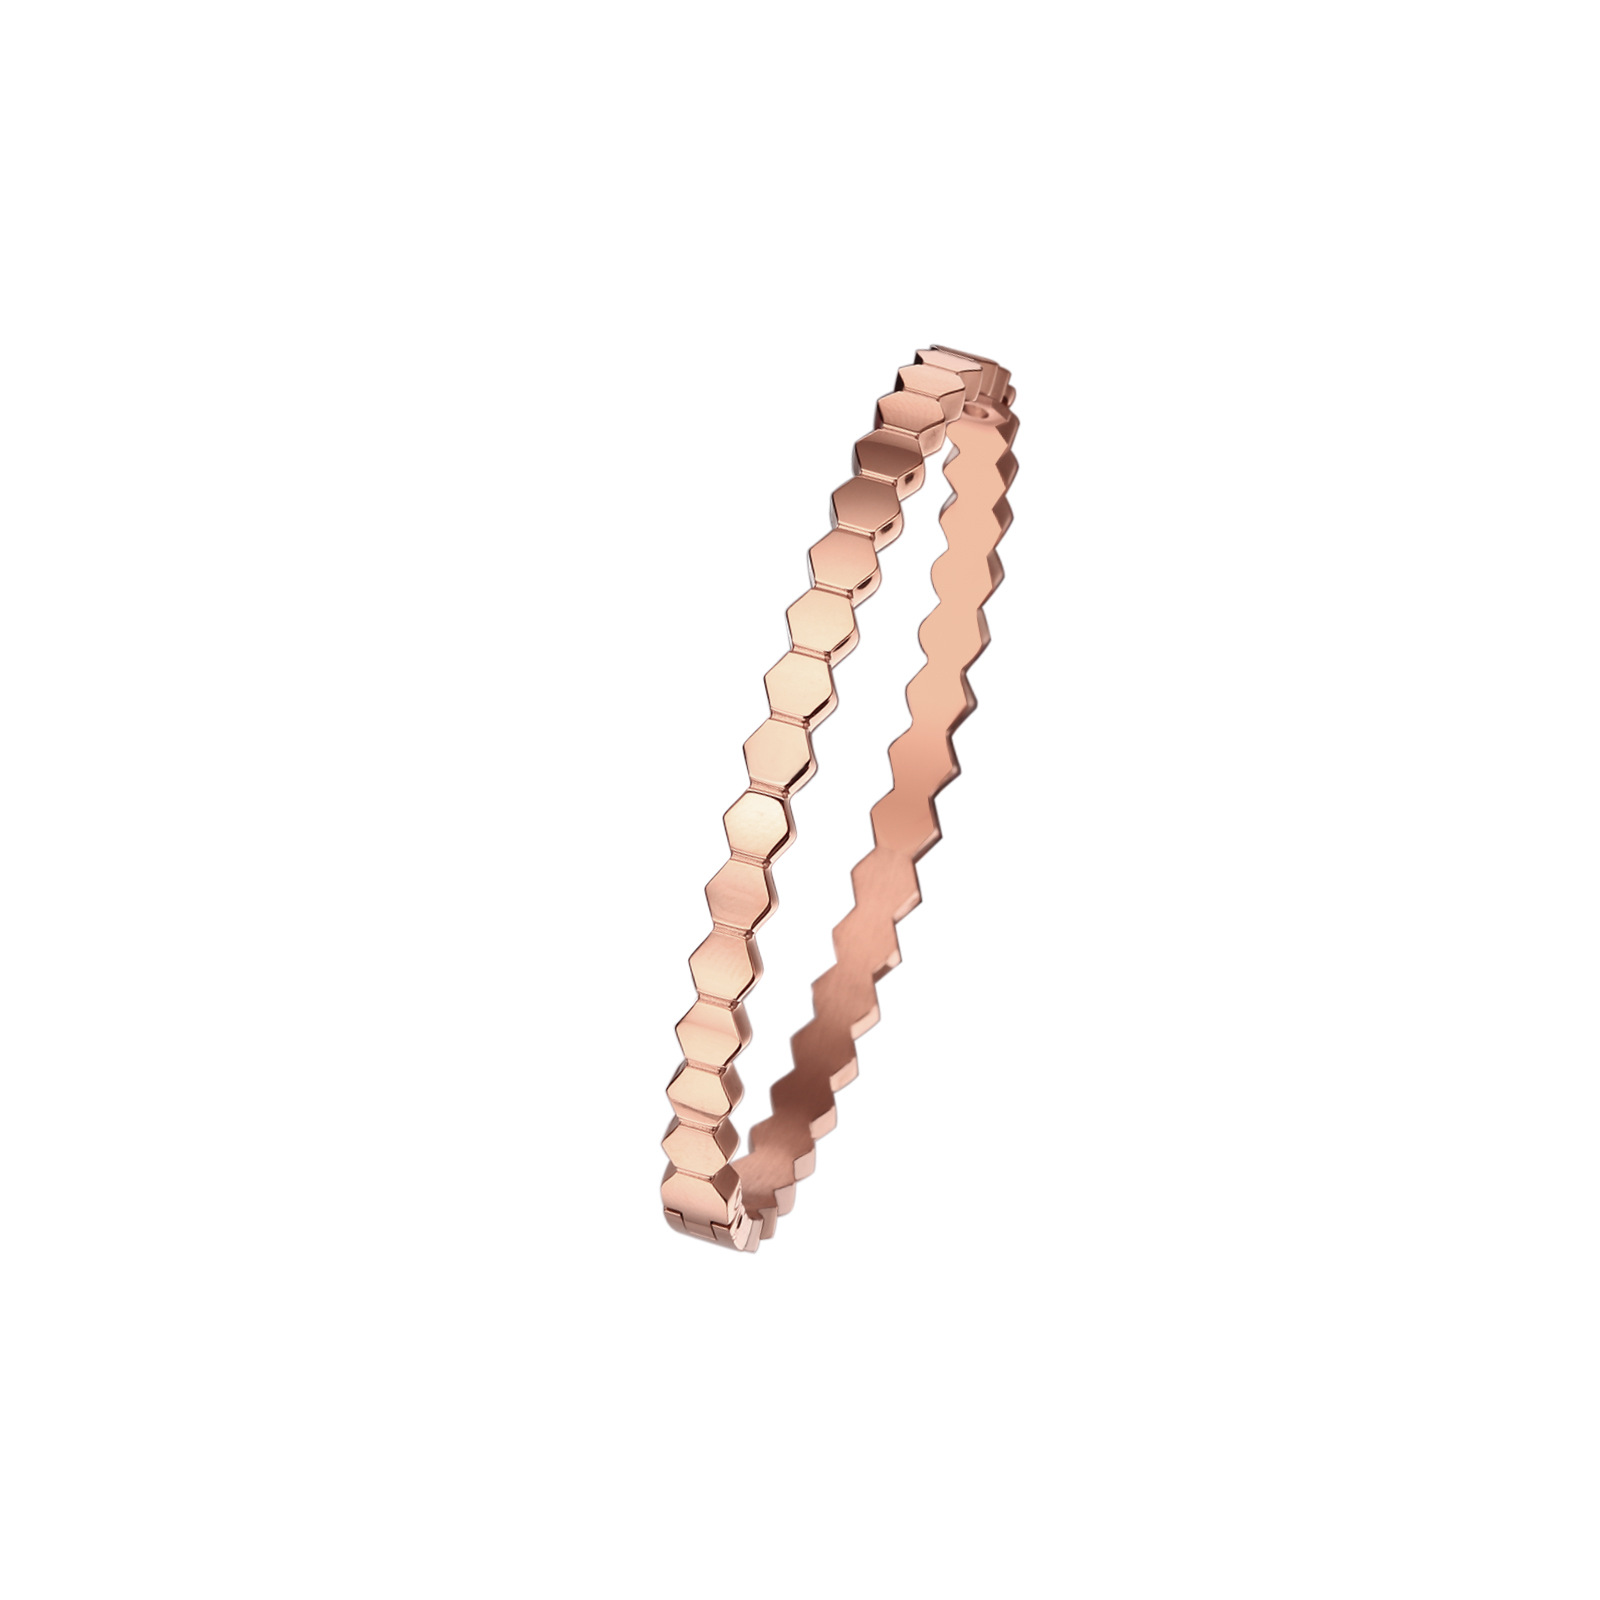 6:Rose gold without diamonds